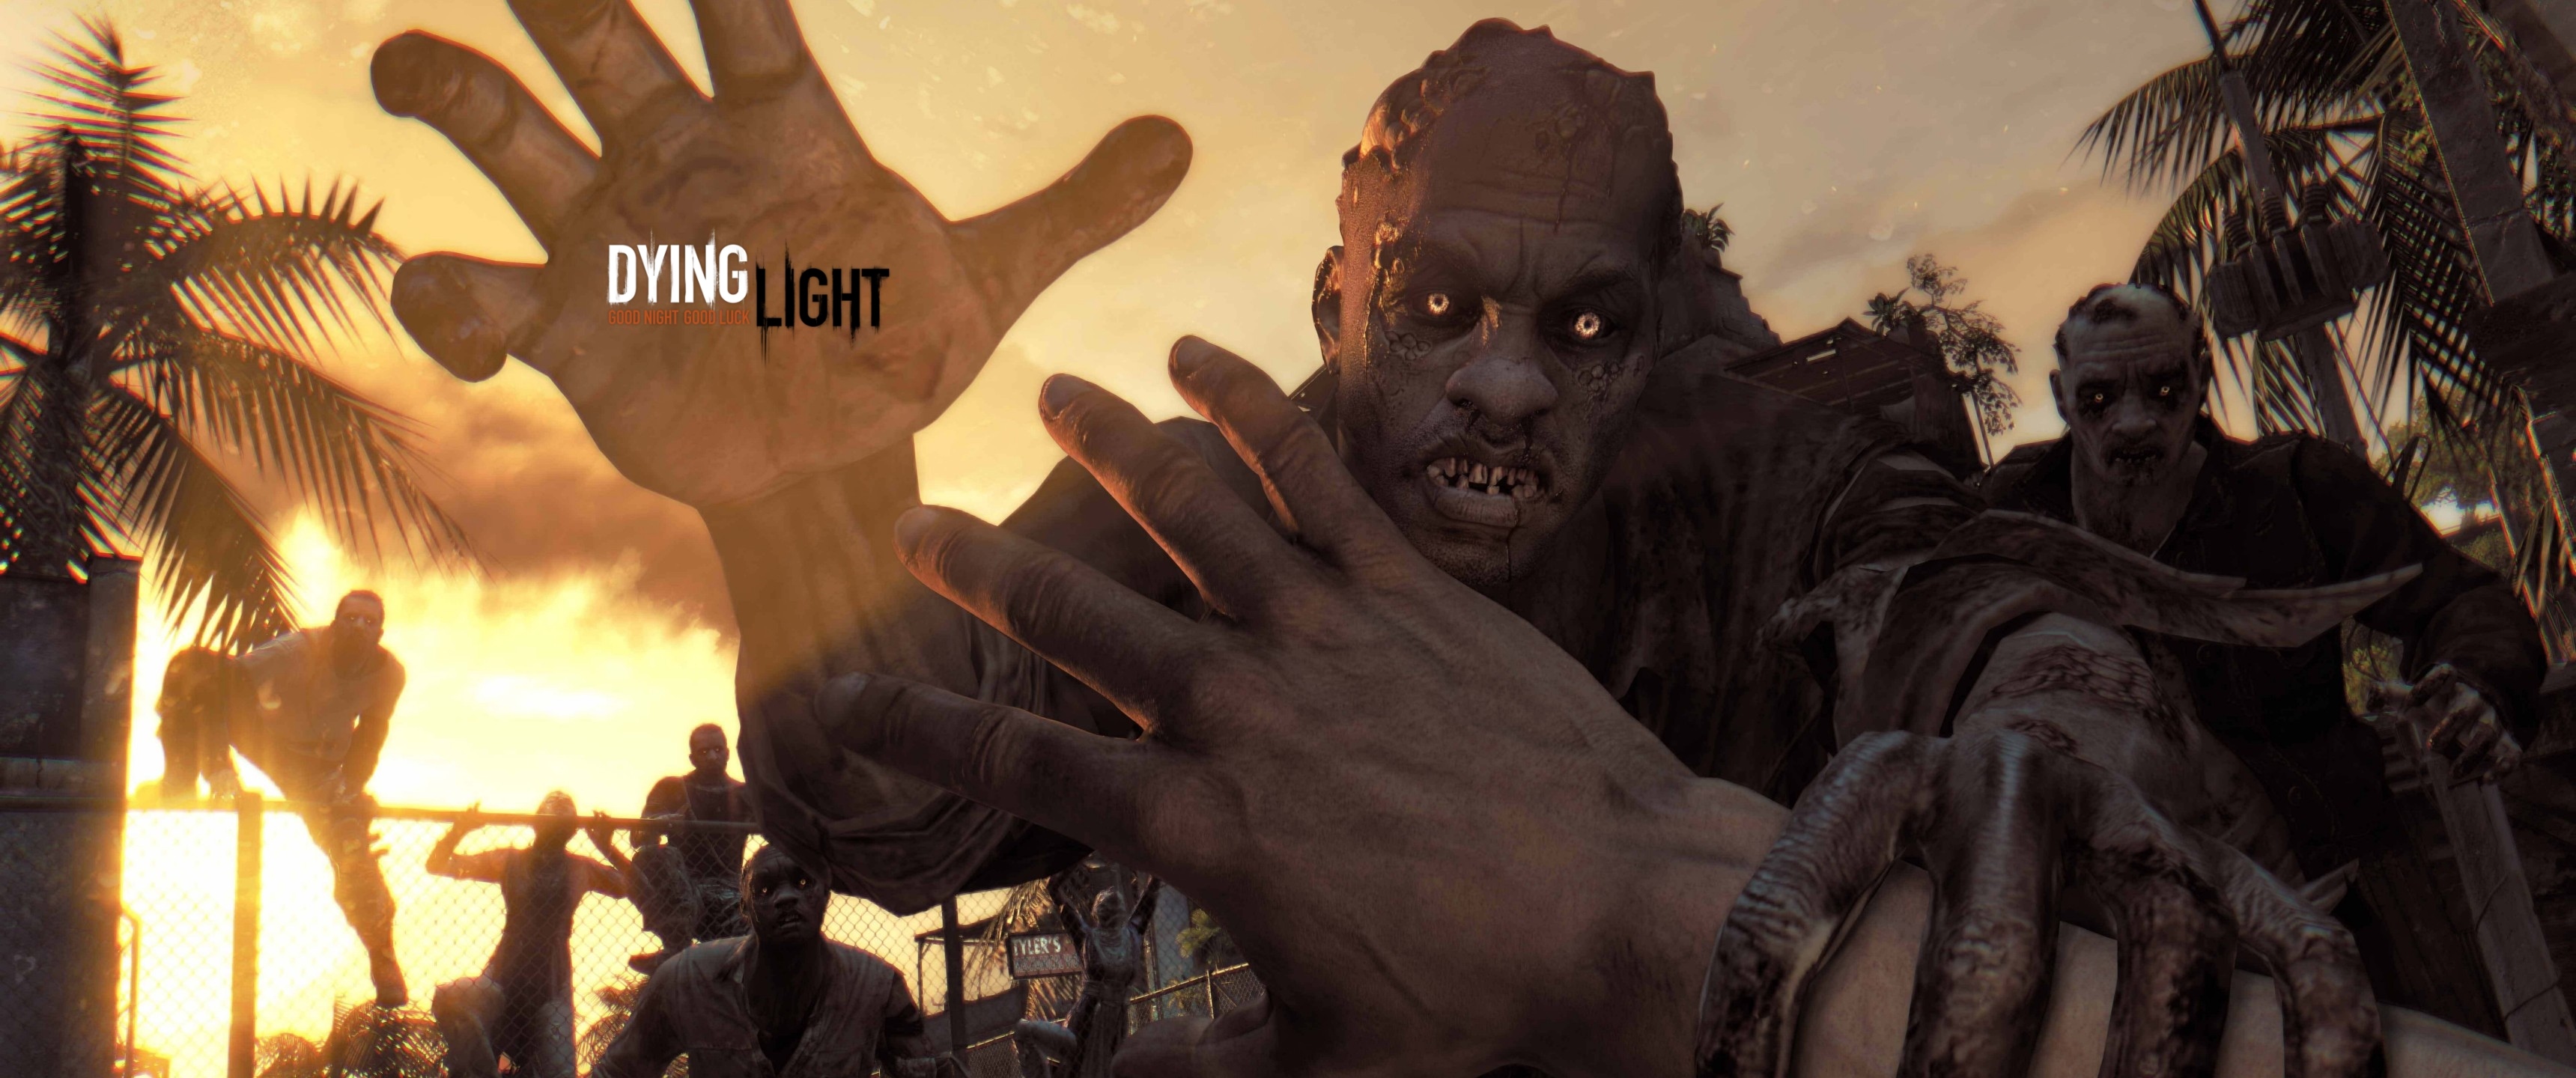 Dying Light 2 Zombies - HD Wallpaper 